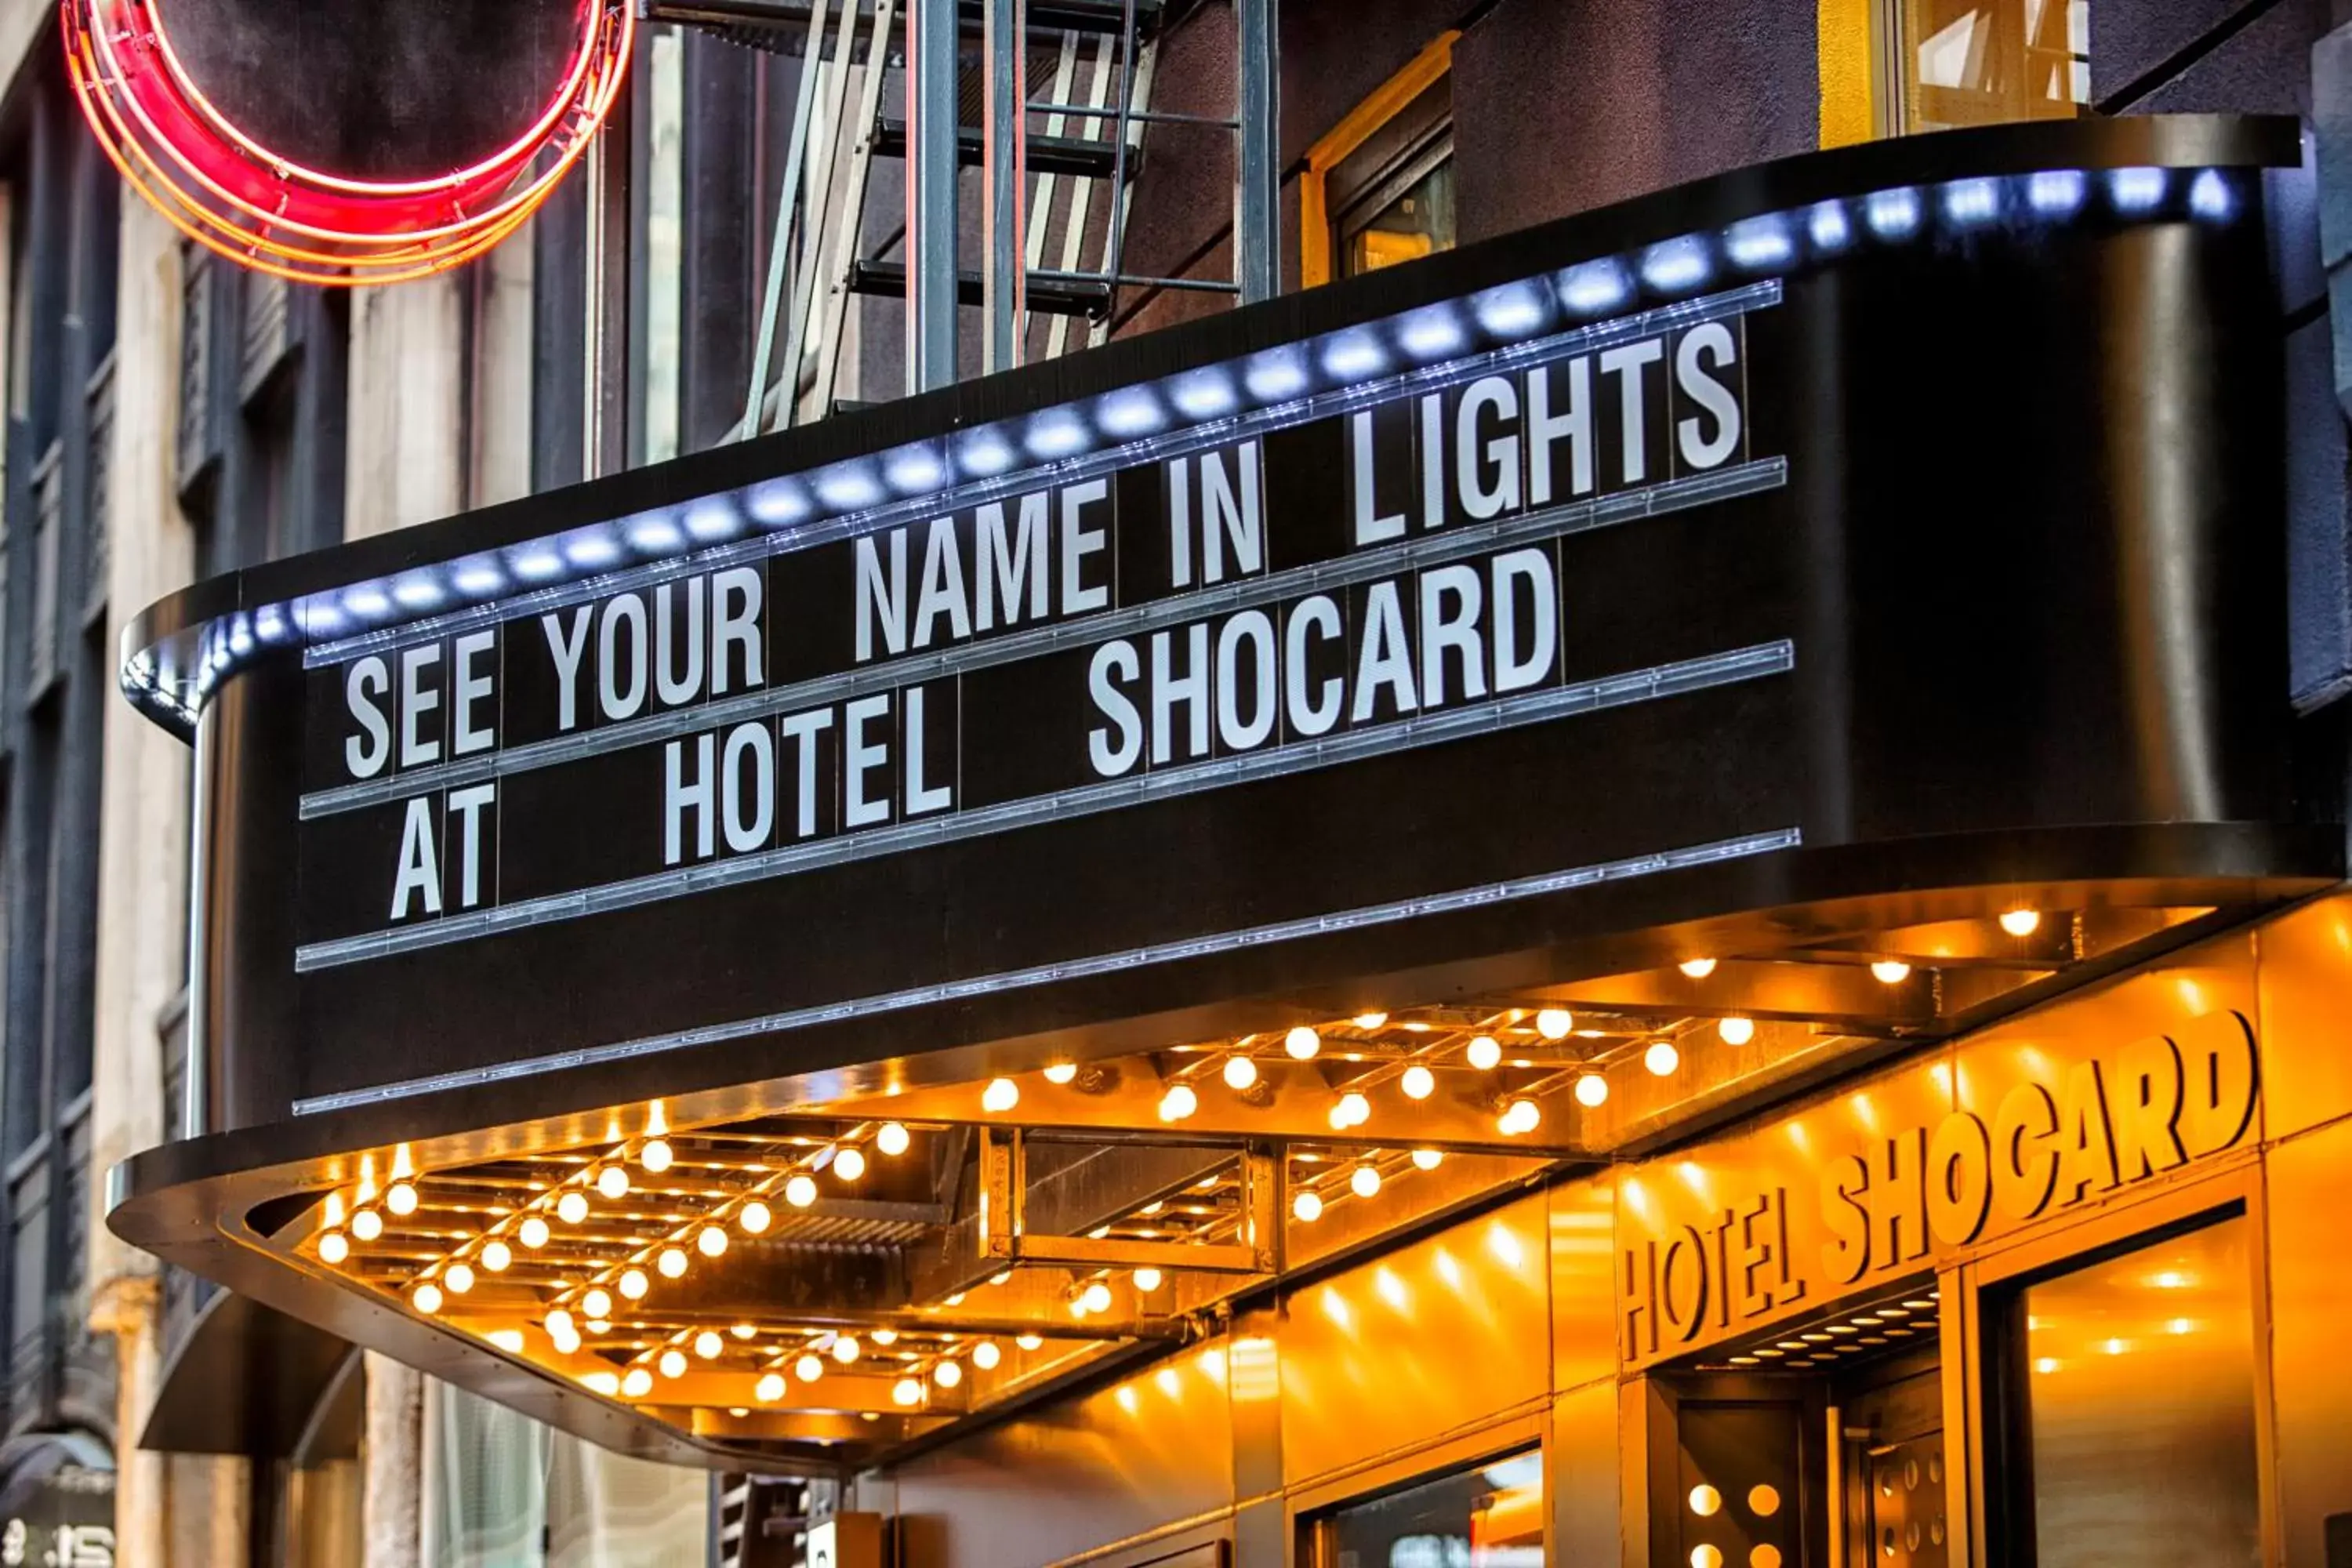 Facade/entrance in Hotel Shocard Broadway, Times Square